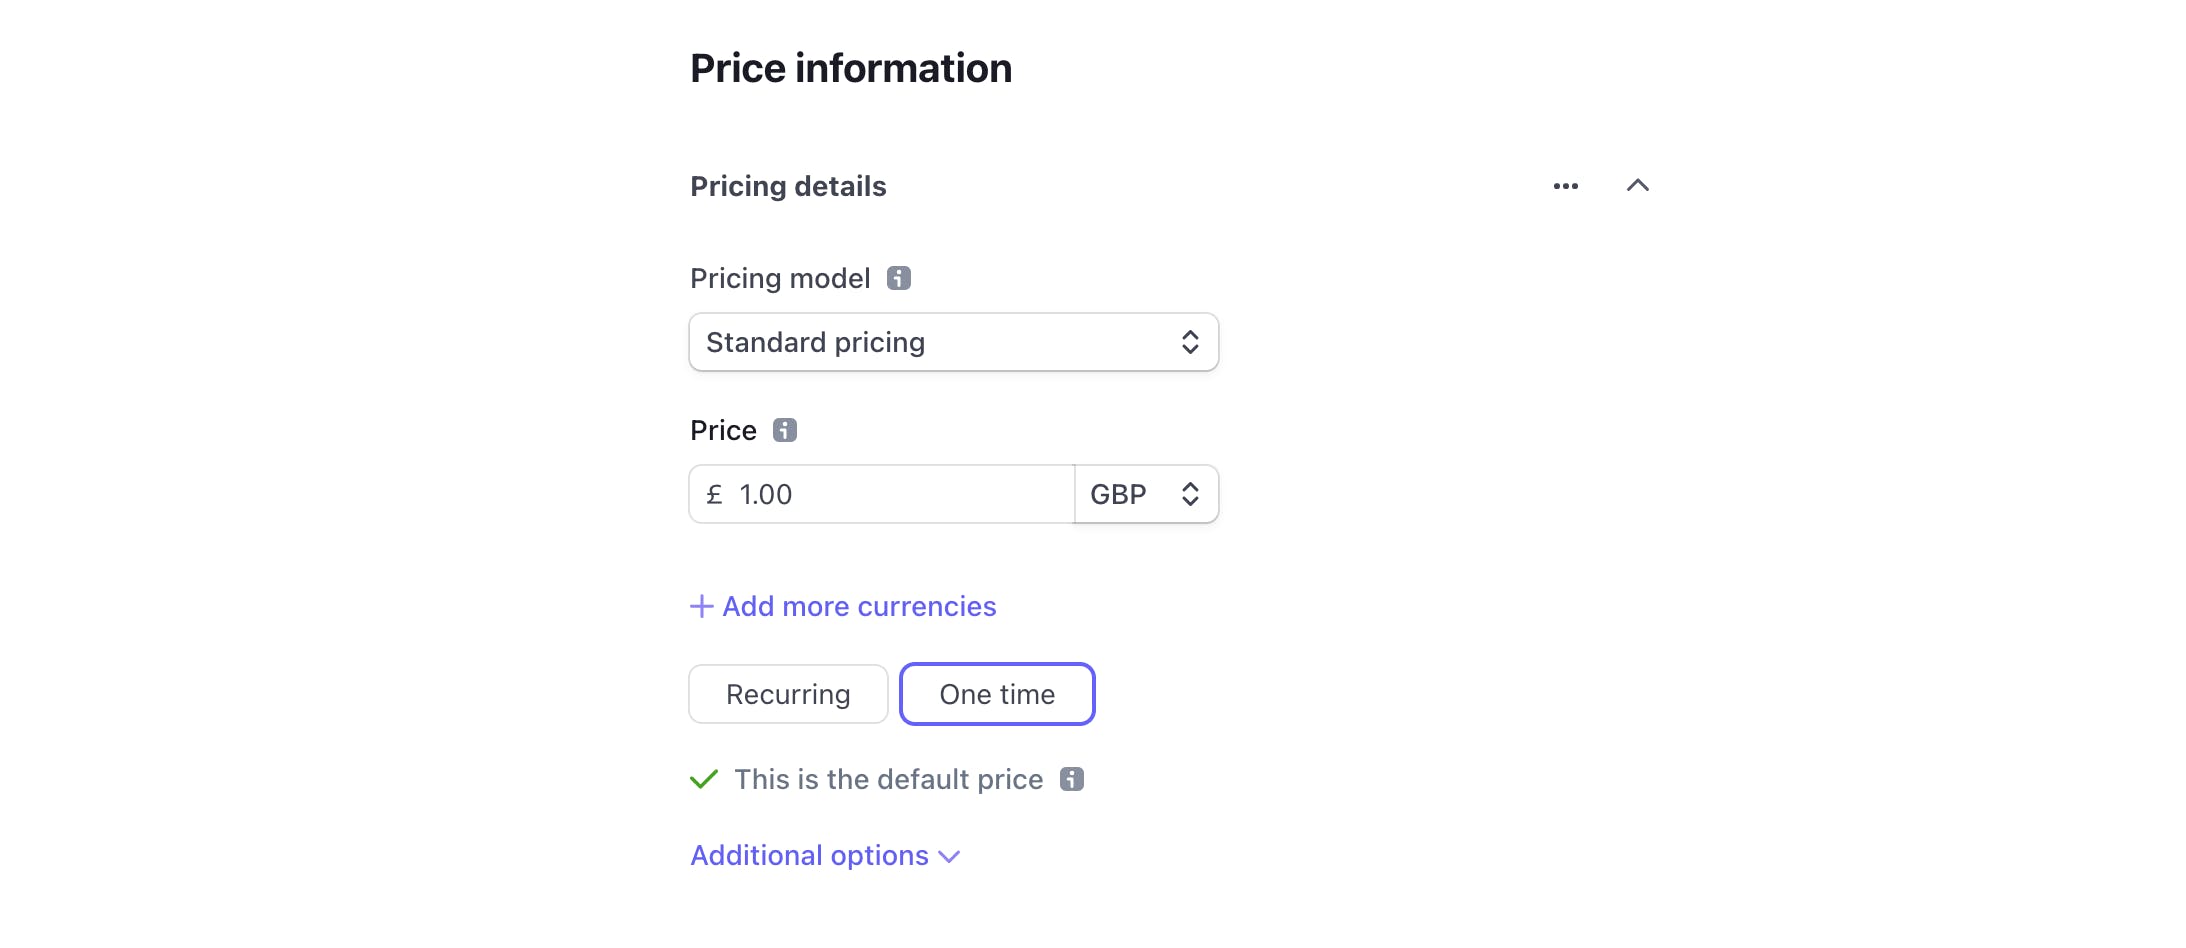 Screenshot of the Price information section of the screen. We have entered £1.00 as the price and selected "One time" as the type of payment.